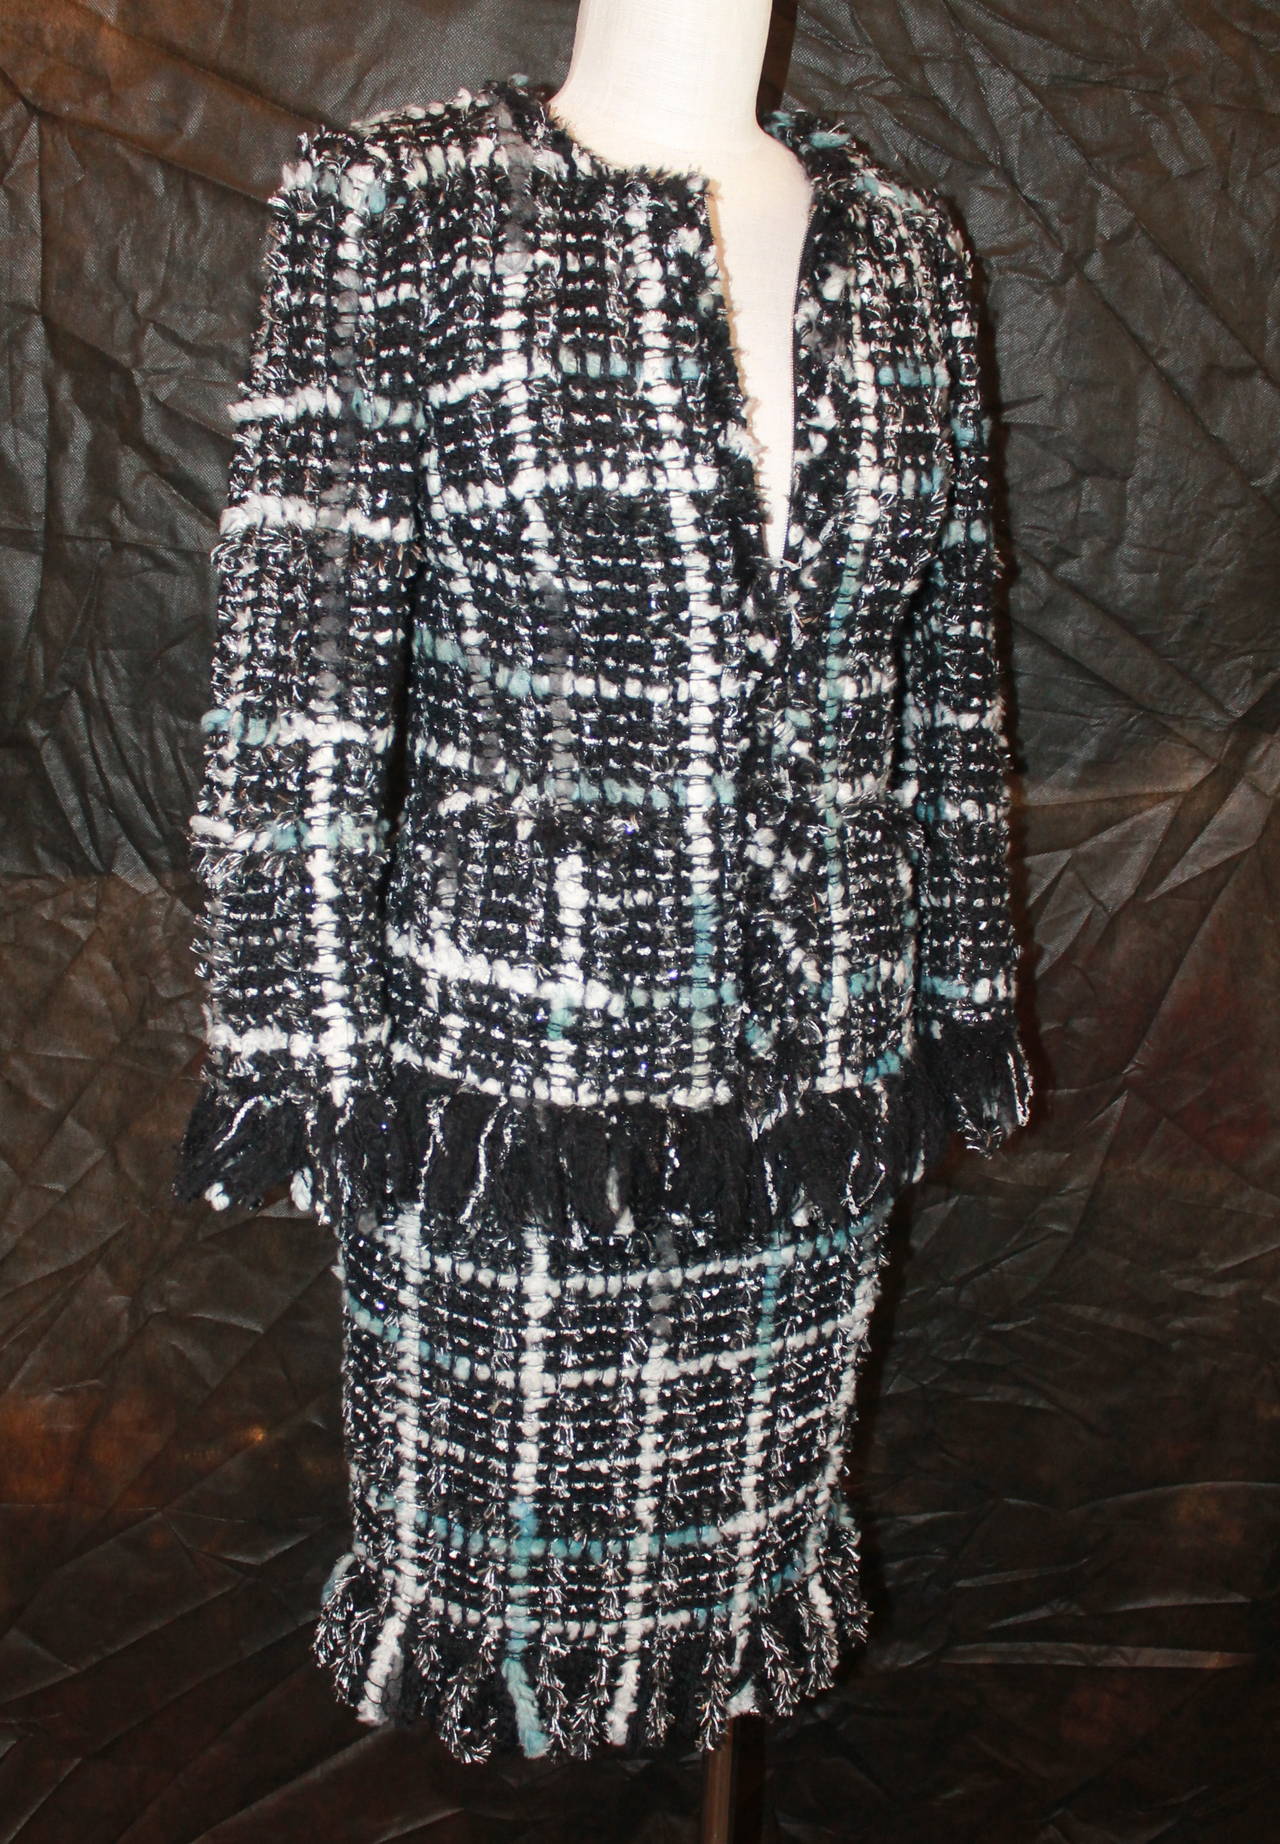 Chanel Blue, Silver, Black Tweed Skirt Suit with Fringe - 34 - cc 2013. This set is in excellent condition with no visible signs of wear. The skirt has a band at the waist and the jacket zips up. The jacket also has 2 pockets.